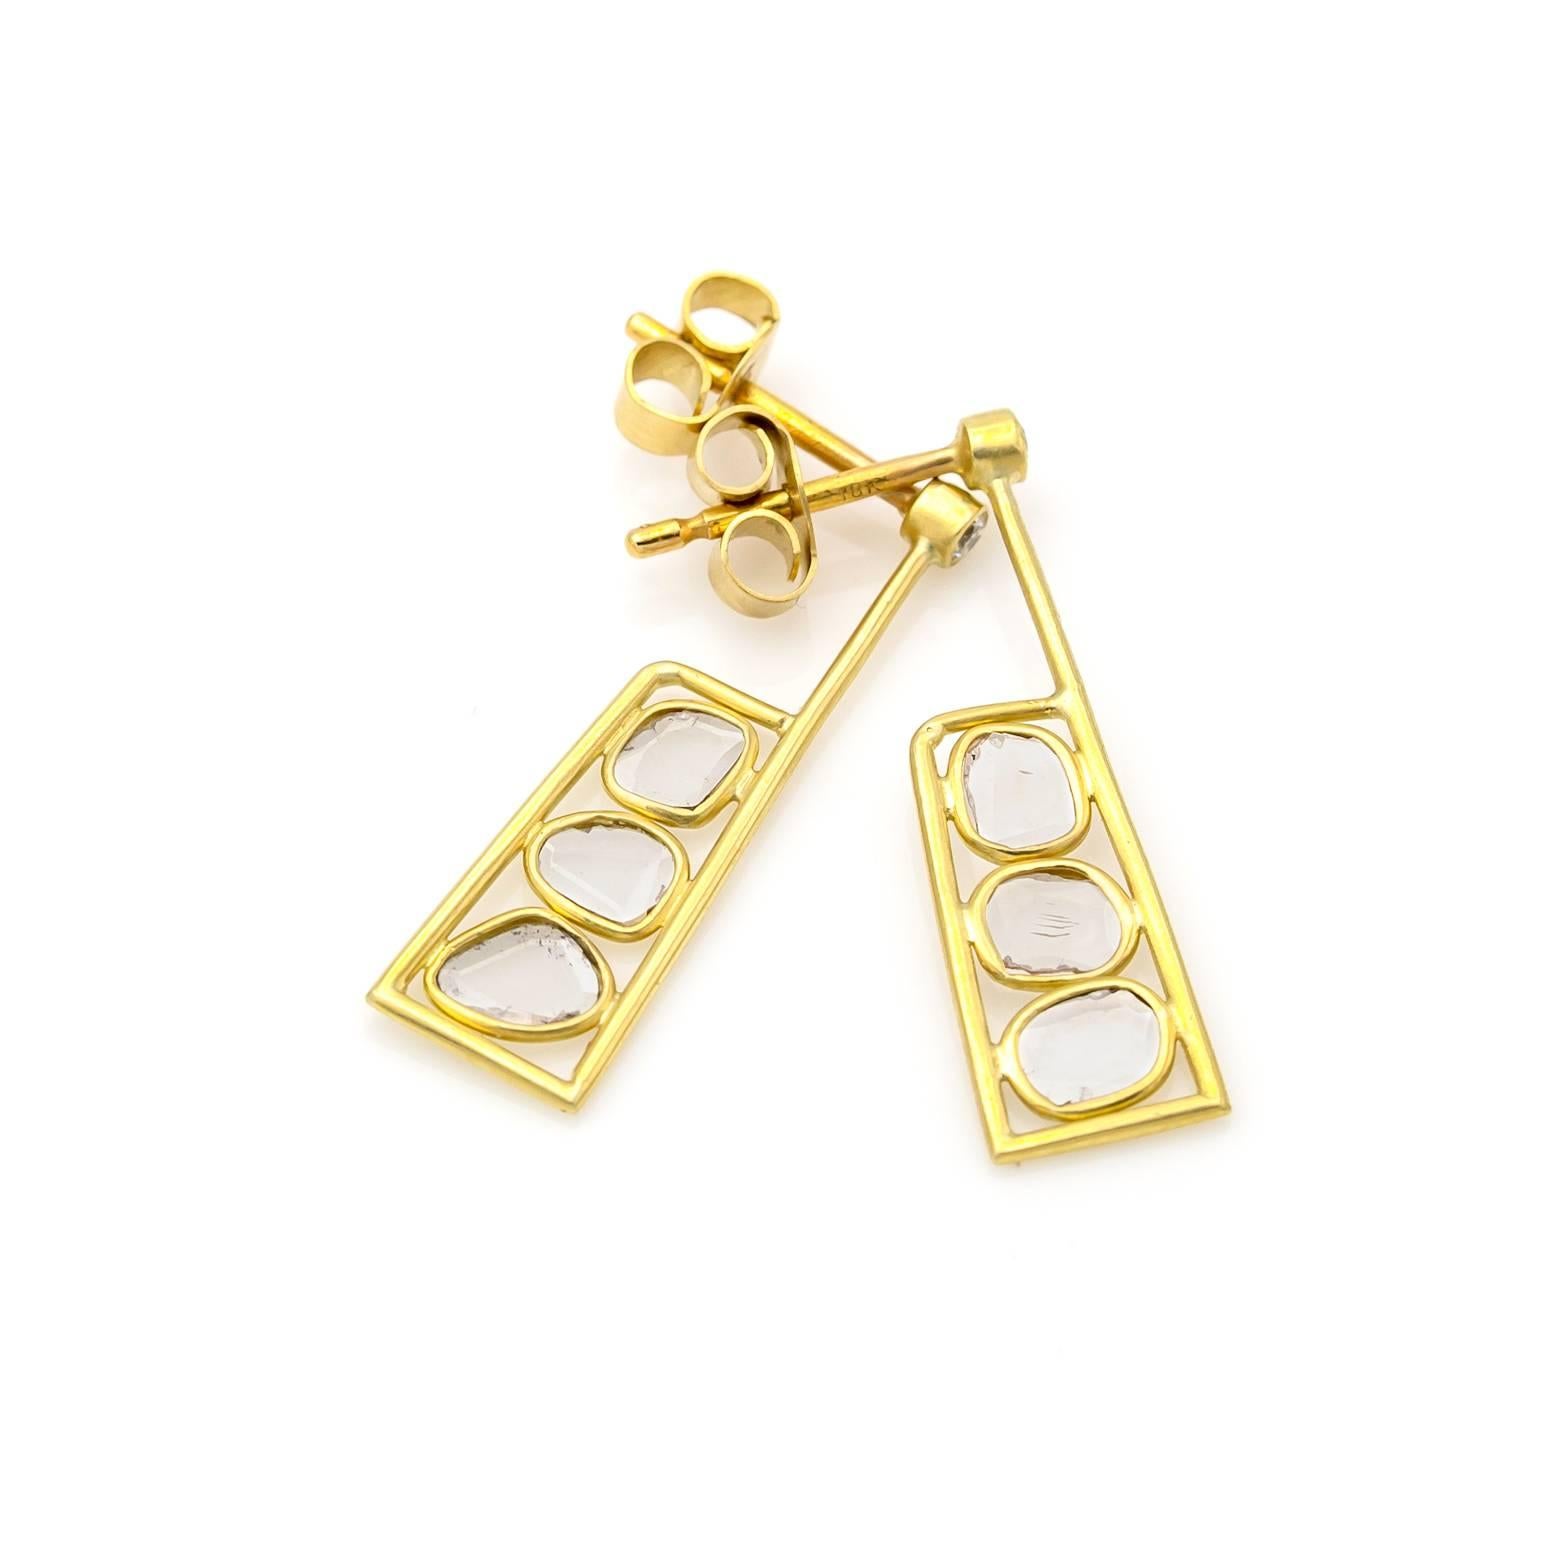 Organic rose cut diamonds are artistically set in 18K satin finished yellow gold with a white diamond on the post. A glimpse of sparkle in these earrings that can easily dress up any outfit!